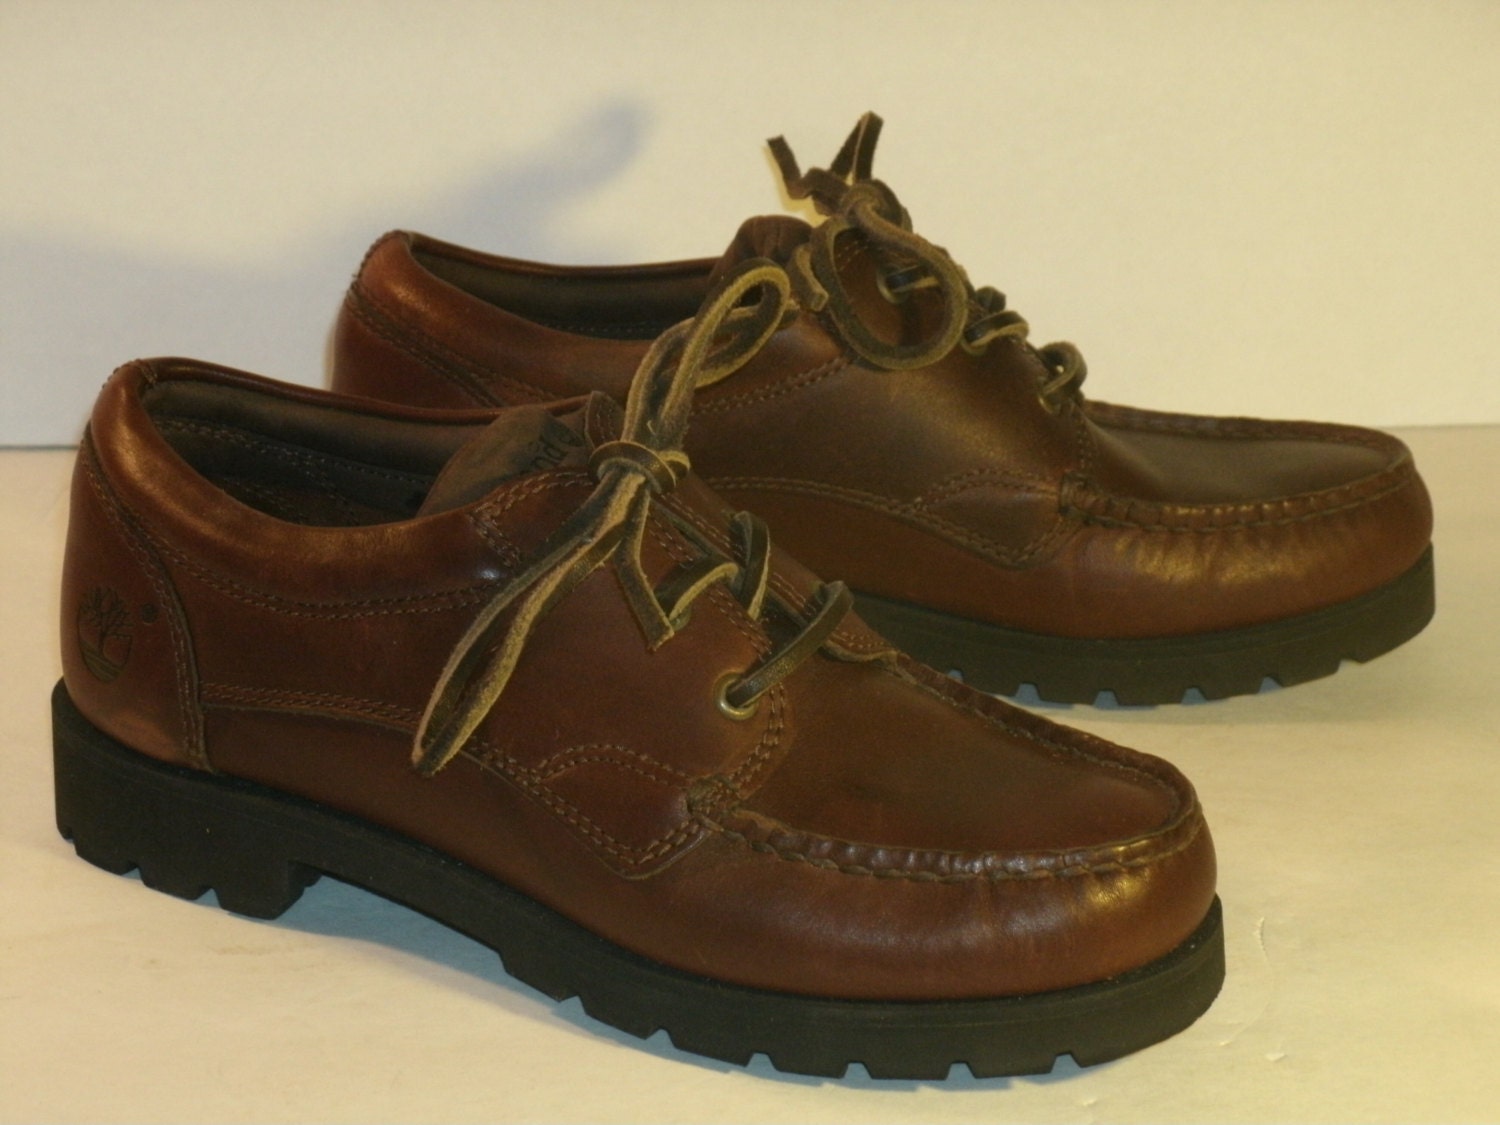 Timberland Oxford Moccasins Brown Leather Shoes 3 Eyelet